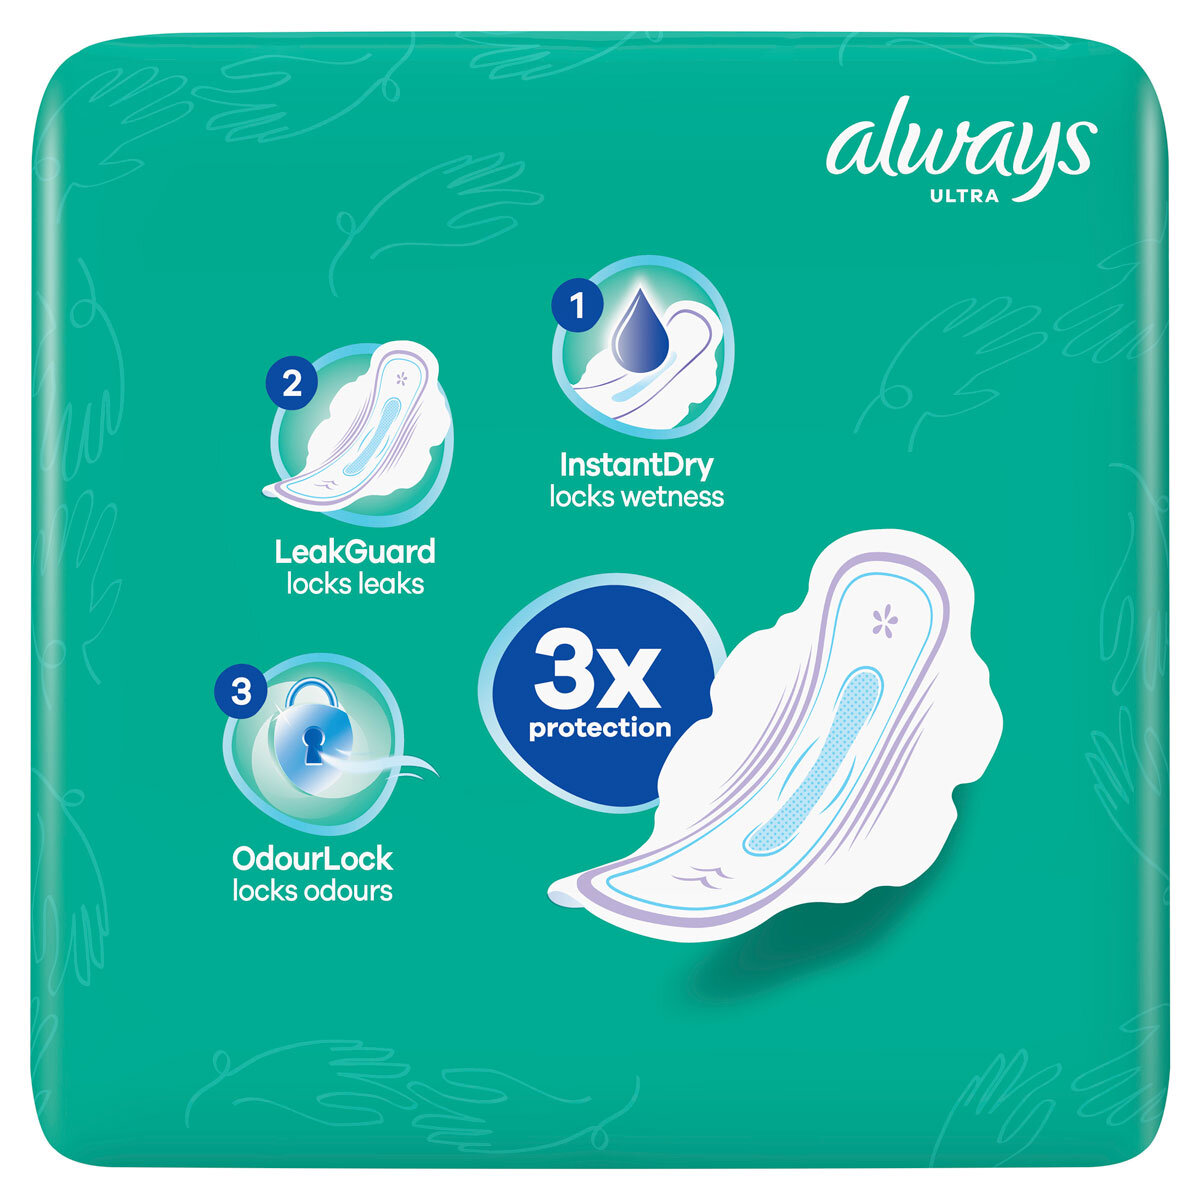 Always Ultra Normal Size 1 Sanitary Towels with Wings, 56